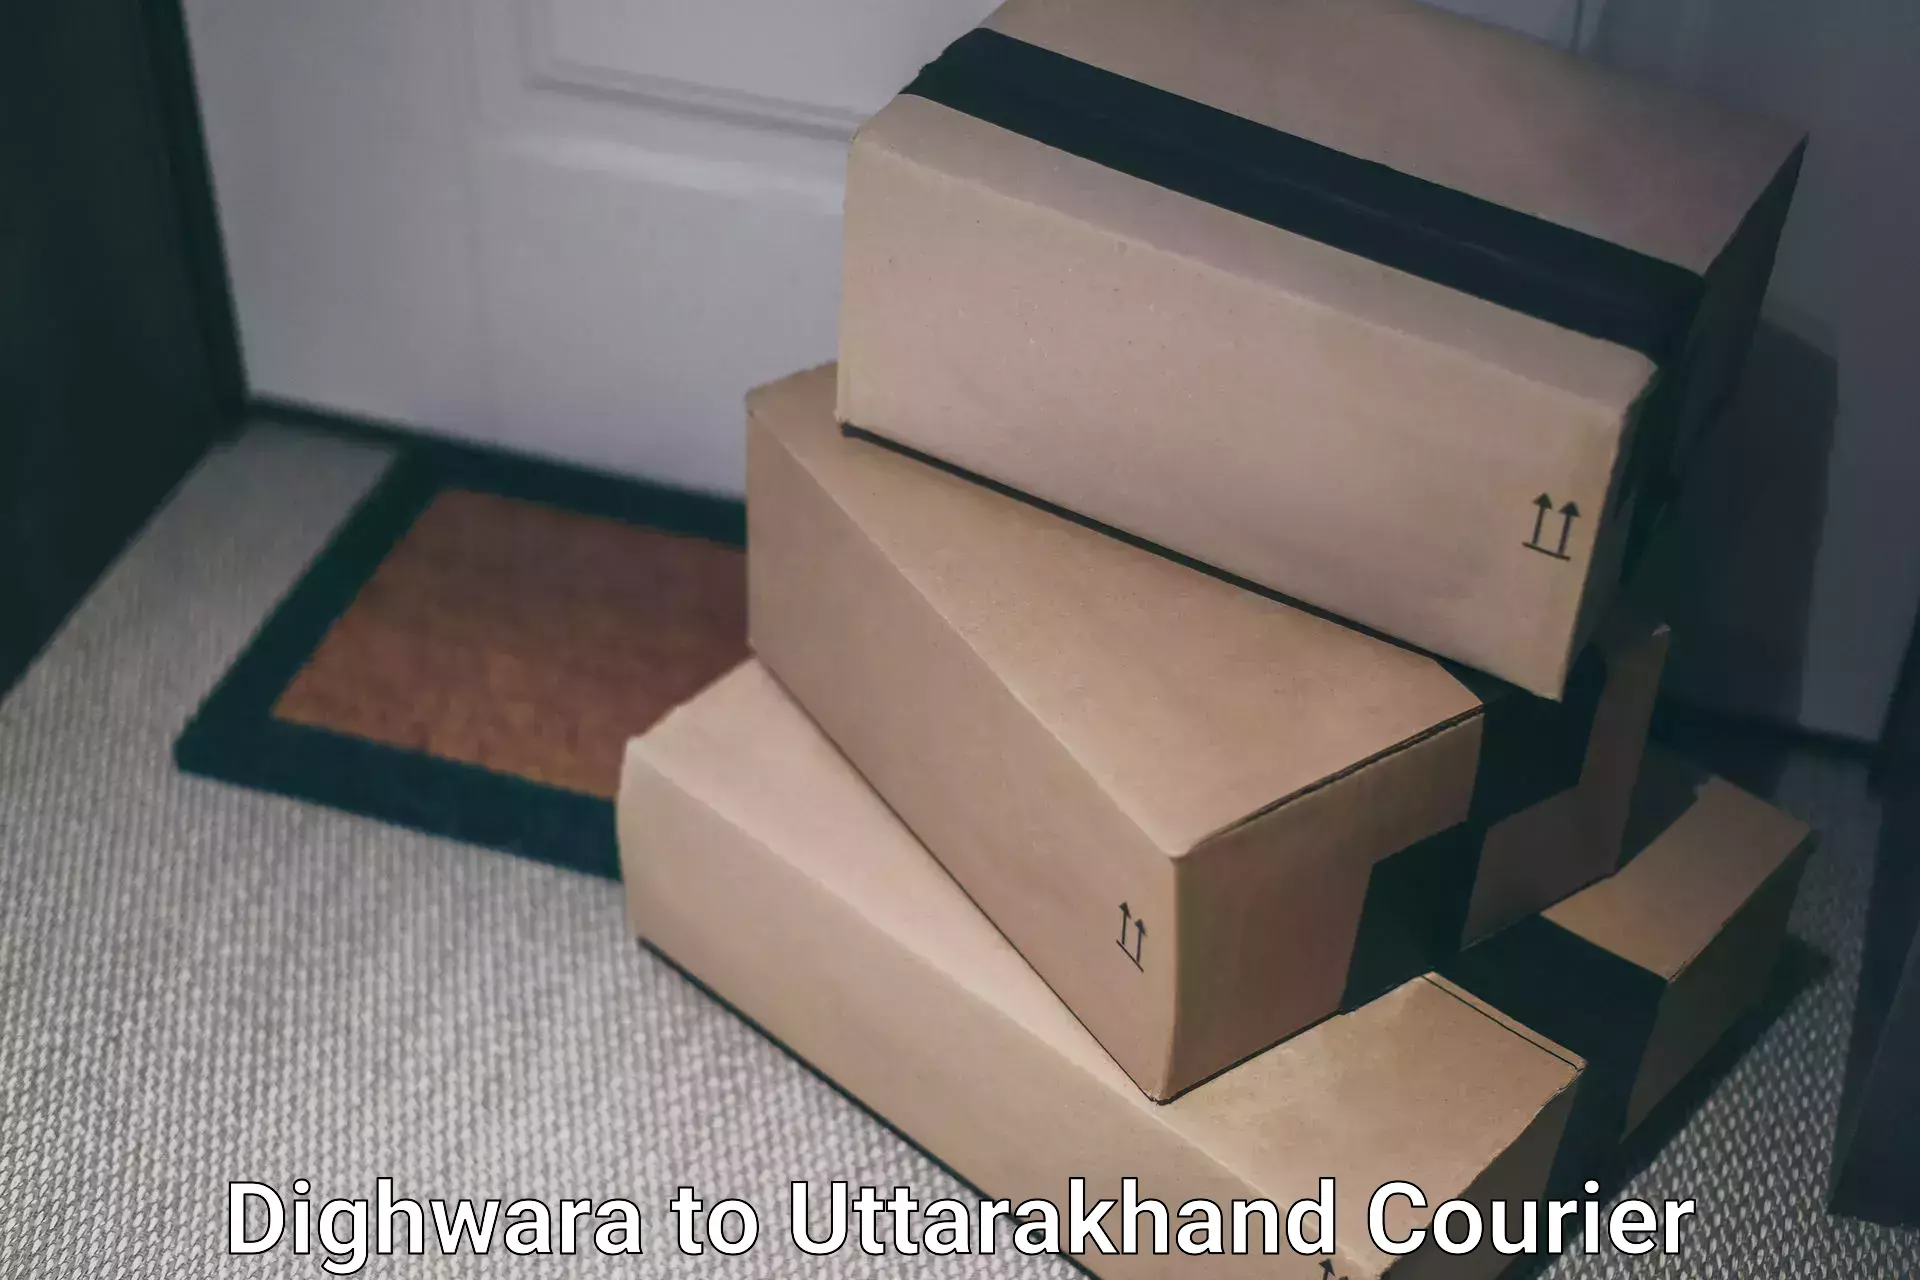 Same-day delivery options Dighwara to Haridwar